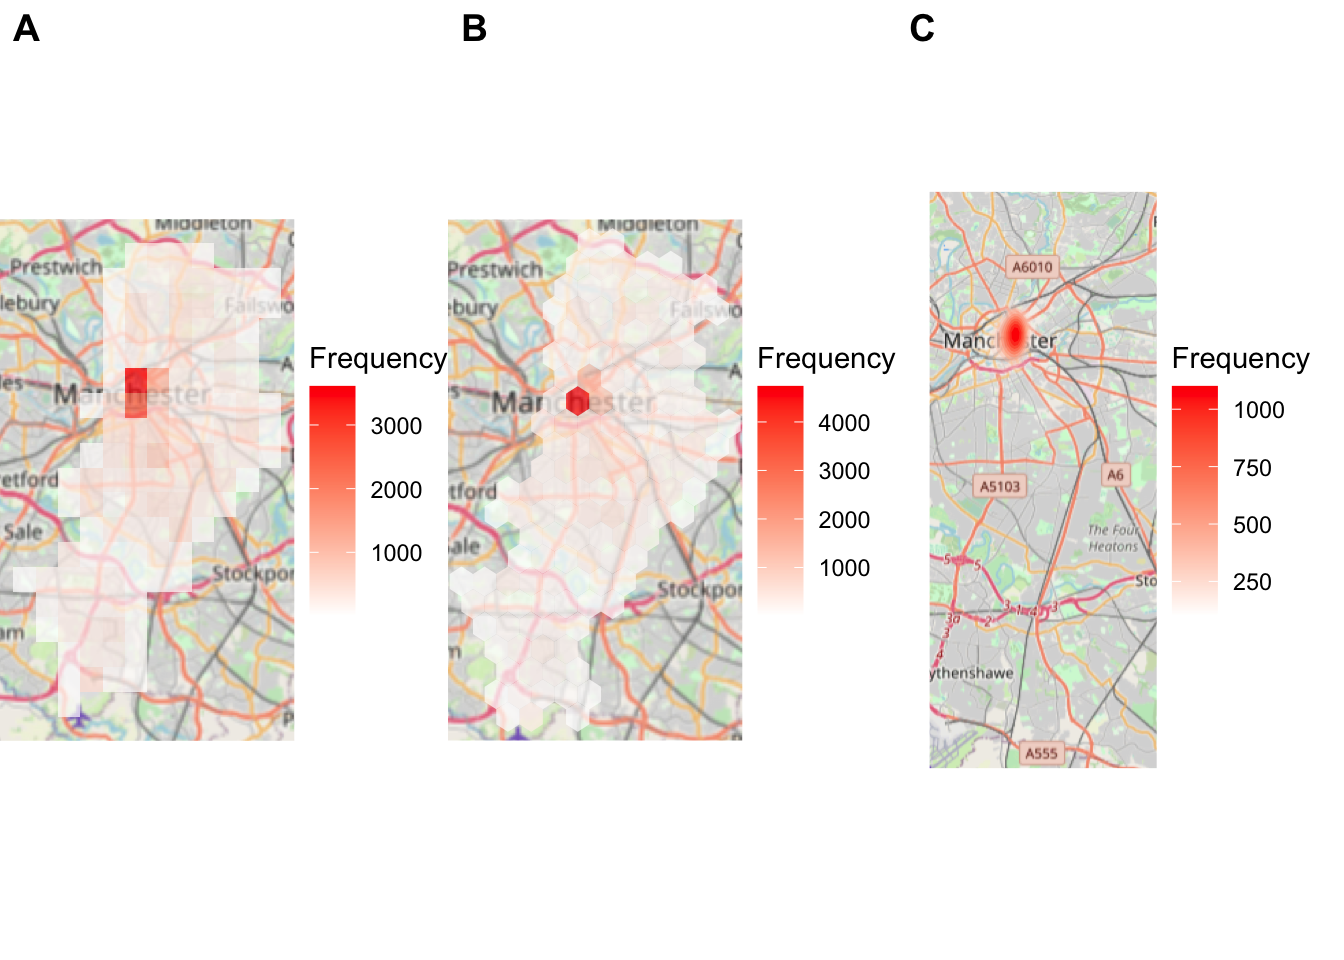 Three different semi-transparent shadings are ovelaid onto three street maps of Manchester, with labels A, B, and C. Their legends all have the same label 'Frequency', and gradient from red to white, but the maximum values differ; over three thousand in A, over four thousand in B, and a little over one thousand in C. In the first one, the shading is broken into single-coloured squares. One square is dark red, with its bottom and right neighbours also noticeably darker than the rest. In the second one, single-coloured hexagons tile the map, with just one being a much darker red than the rest. In the third one, no shape constrains the colours, and there is just a small blotch of red fading to white near the city centre.